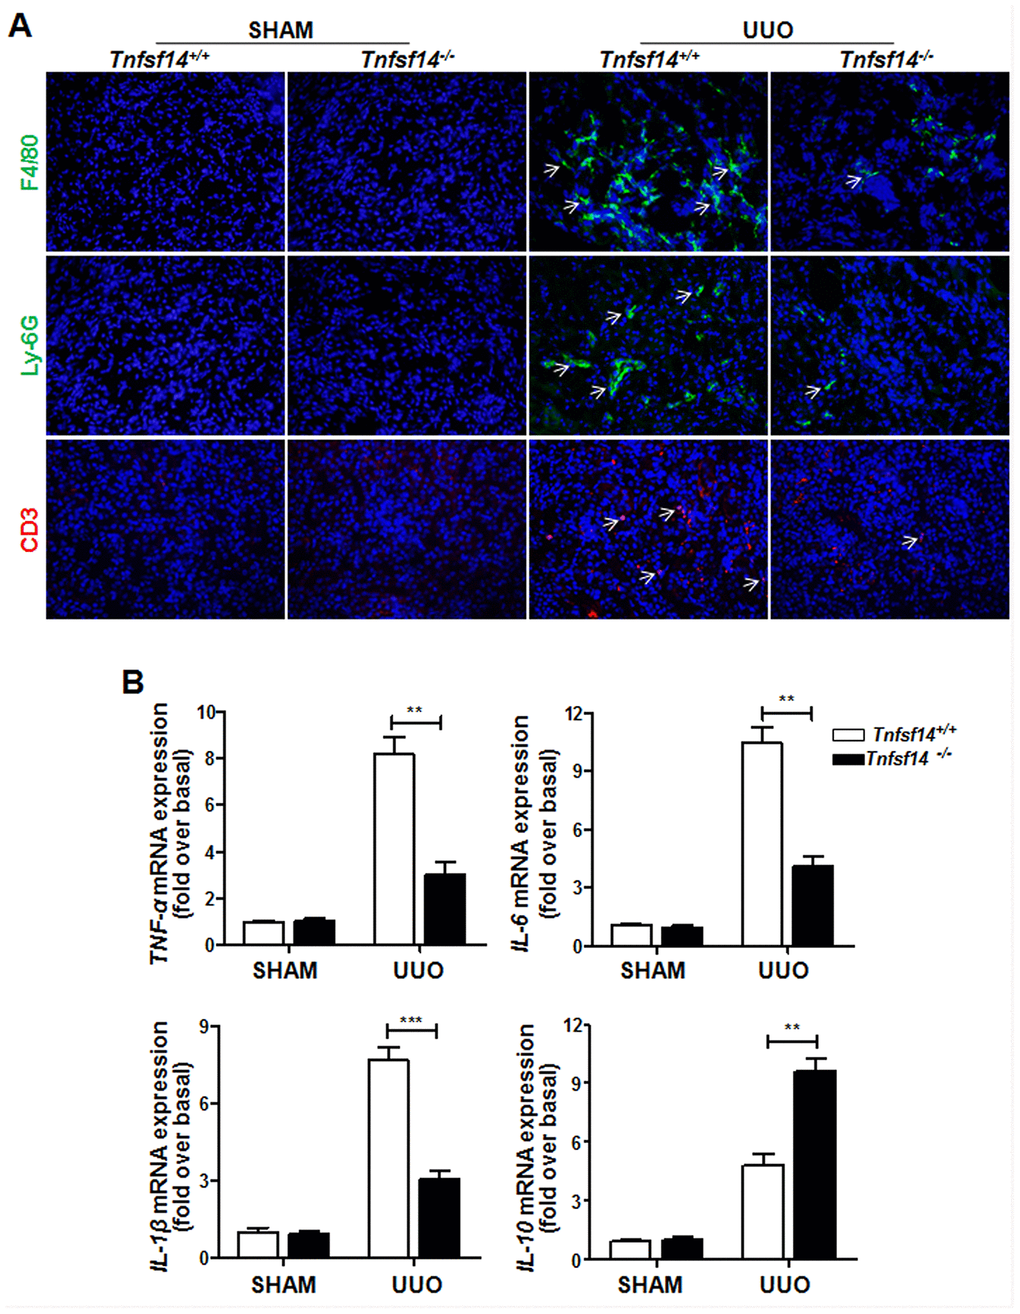 Reduced inflammatory responses in Tnfsf14-deficient mice after UUO. Kidney tissues of Tnfsf14+/+ and Tnfsf14−/− mice were collected after UUO surgery for 7 days. (A) Infiltration of neutrophils (Ly-6G+, white arrows), macrophages (F4/80+, white arrows), and T lymphocytes (CD3+, white arrows) in kidney tissues was assessed by immunofluorescence. Original magnification ×400. (B) The mRNA levels of inflammatory cytokines TNF-α, IL-6, IL-1β, and IL-10 in kidney tissues were measured by qRT-PCR. Sham group was used as the control of UUO. The data were representative of the results of three independent experiments. Values are represented as means ± SEM. n = 5 per group. **P ***P 